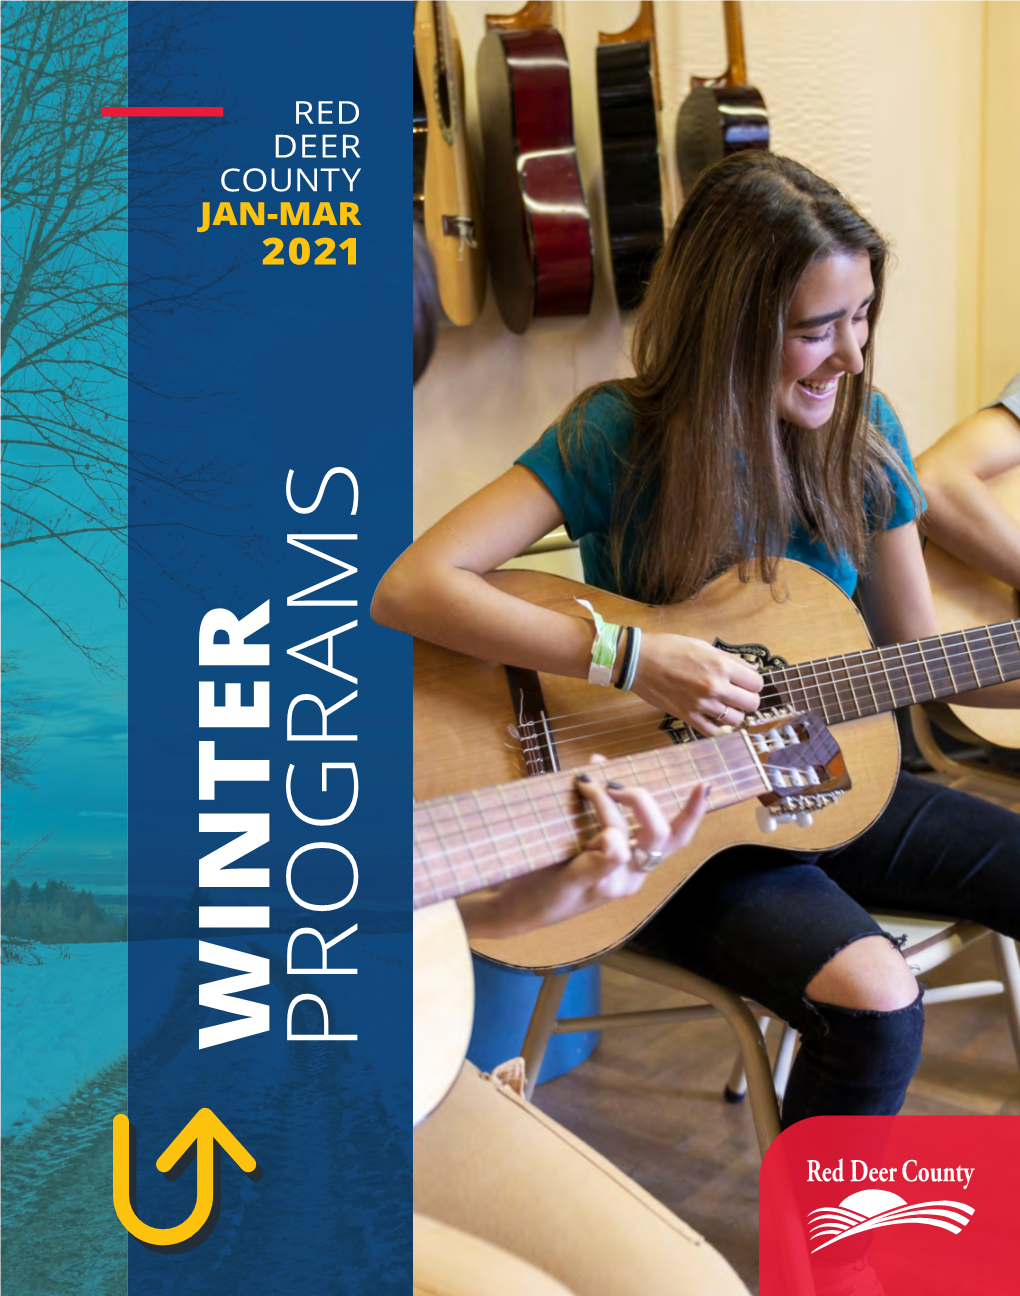 WINTER PROGRAMS VISIT Rdcounty.Ca/Programs to REGISTER OR VIEW THIS GUIDE ONLINE